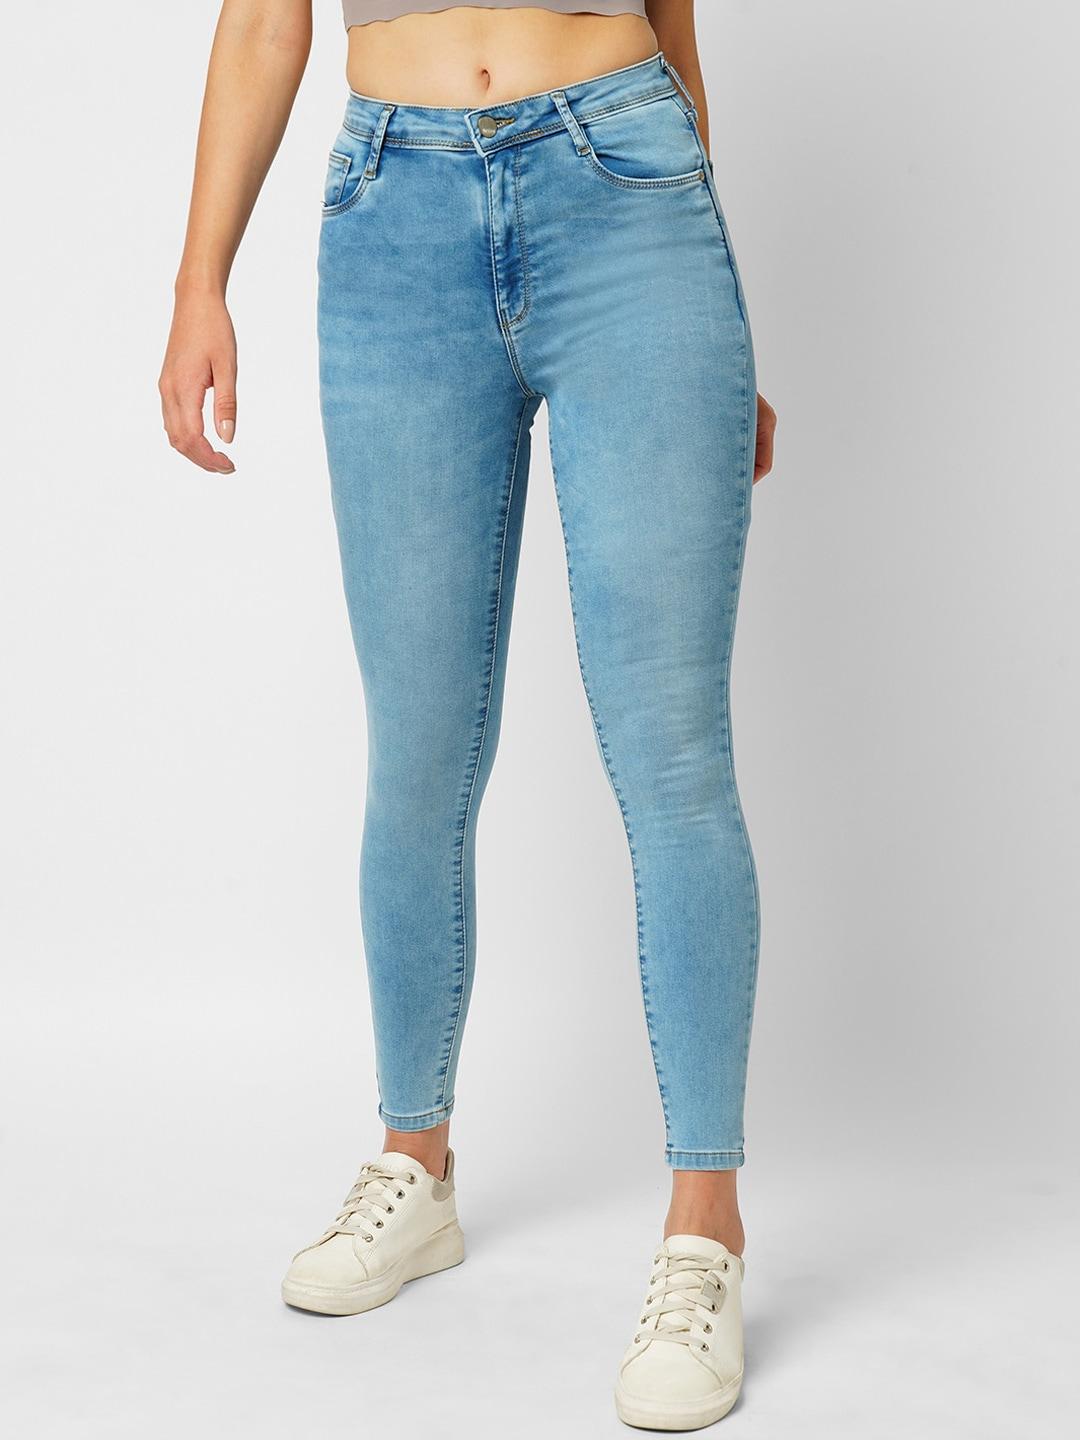 kraus-jeans-women-skinny-fit-high-rise-heavy-fade-stretchable-jeans